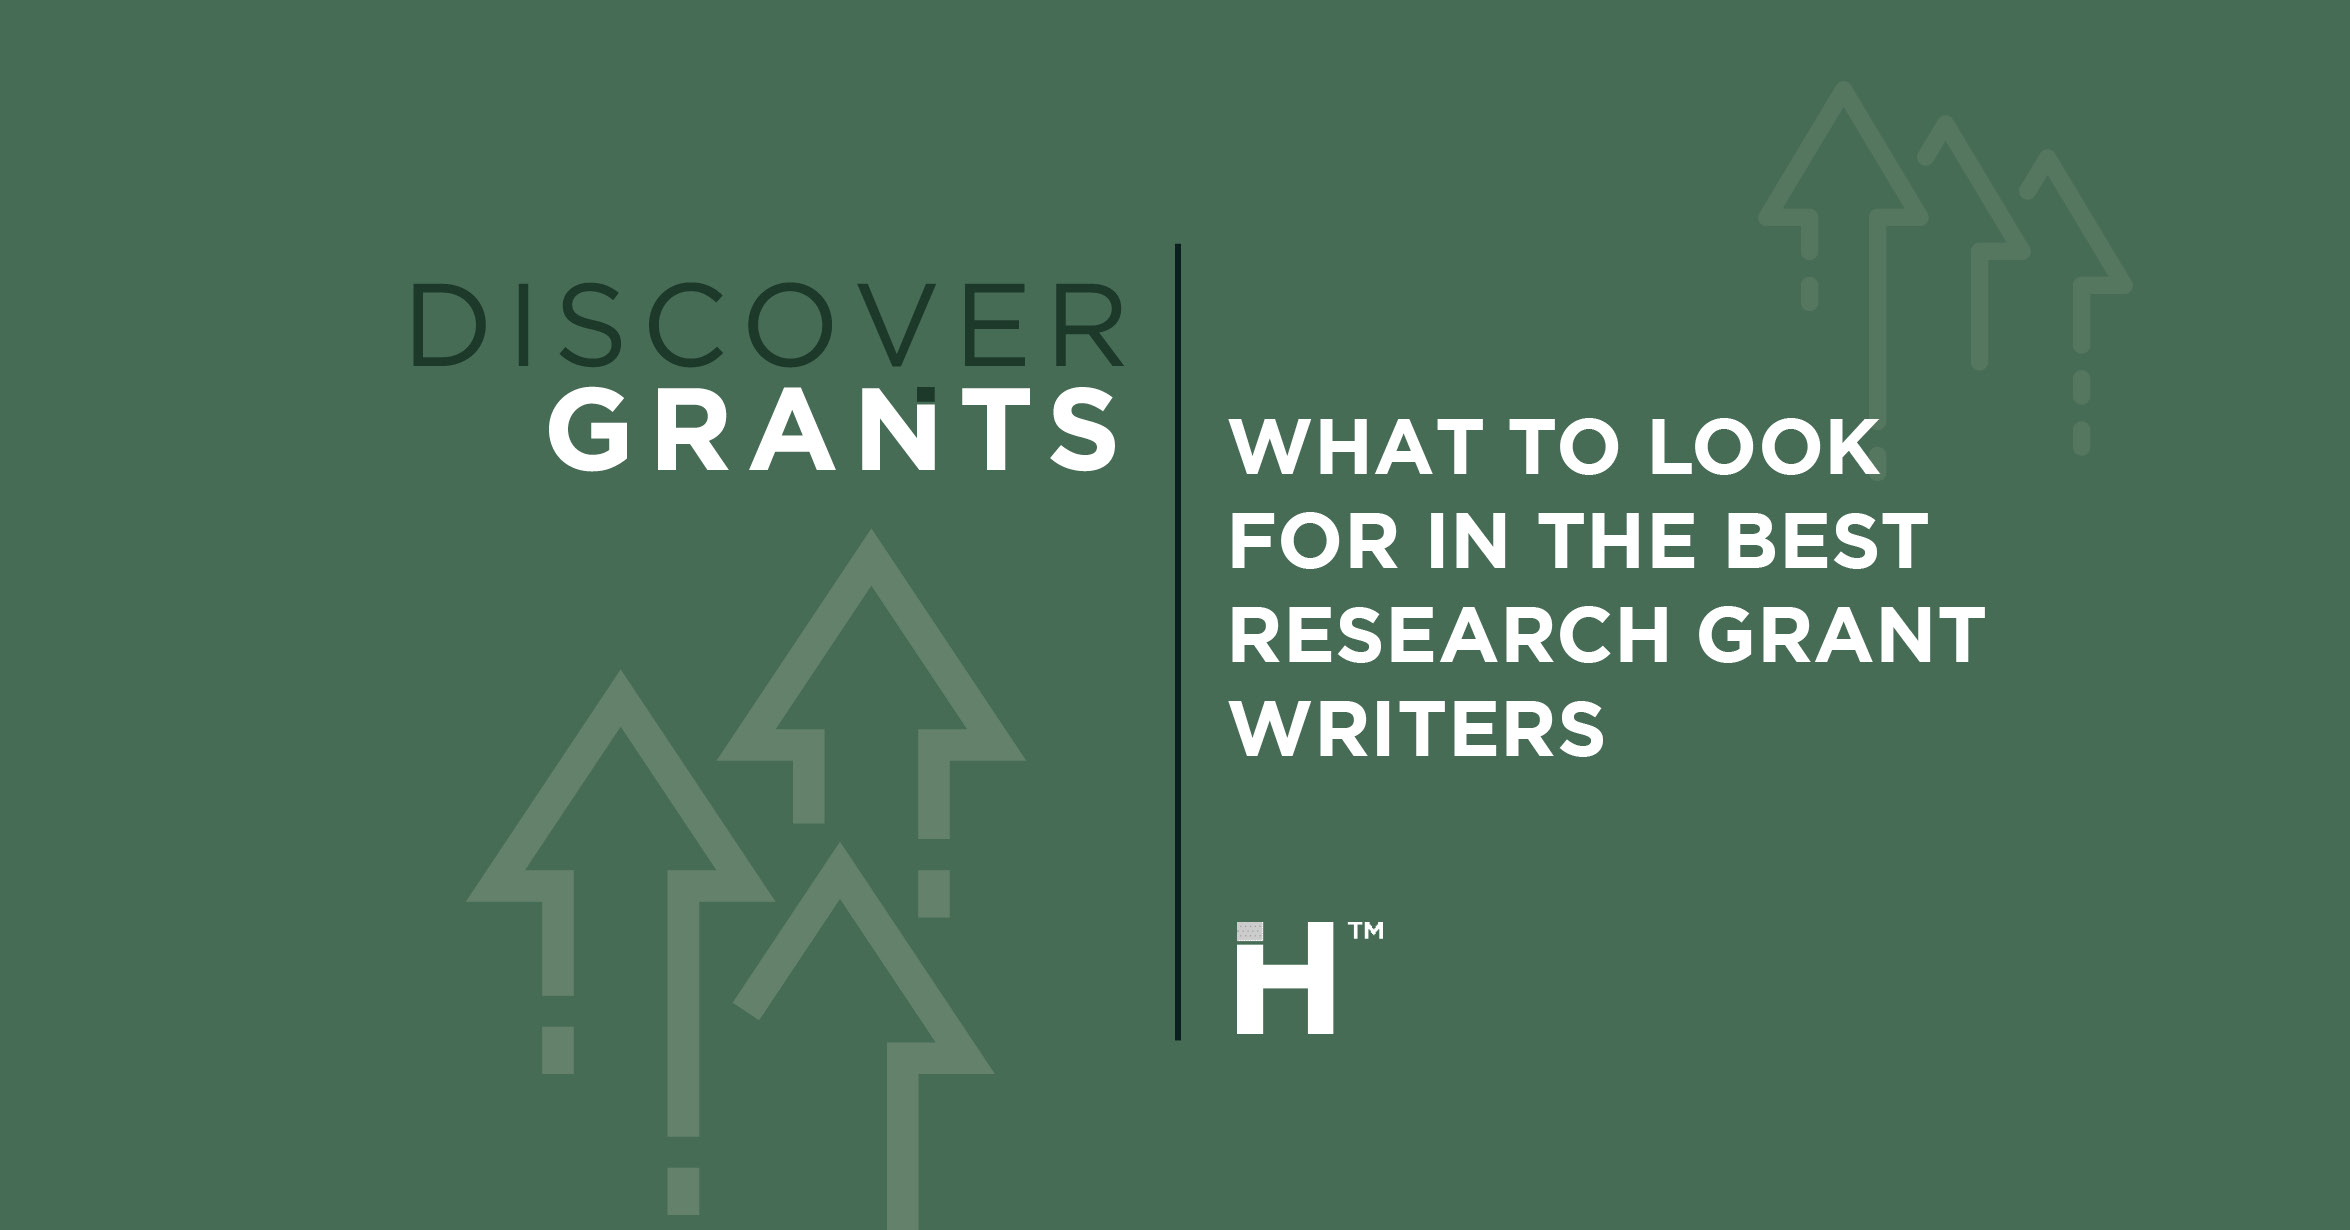 What Skills Do the Best Research Grant Writers Have?